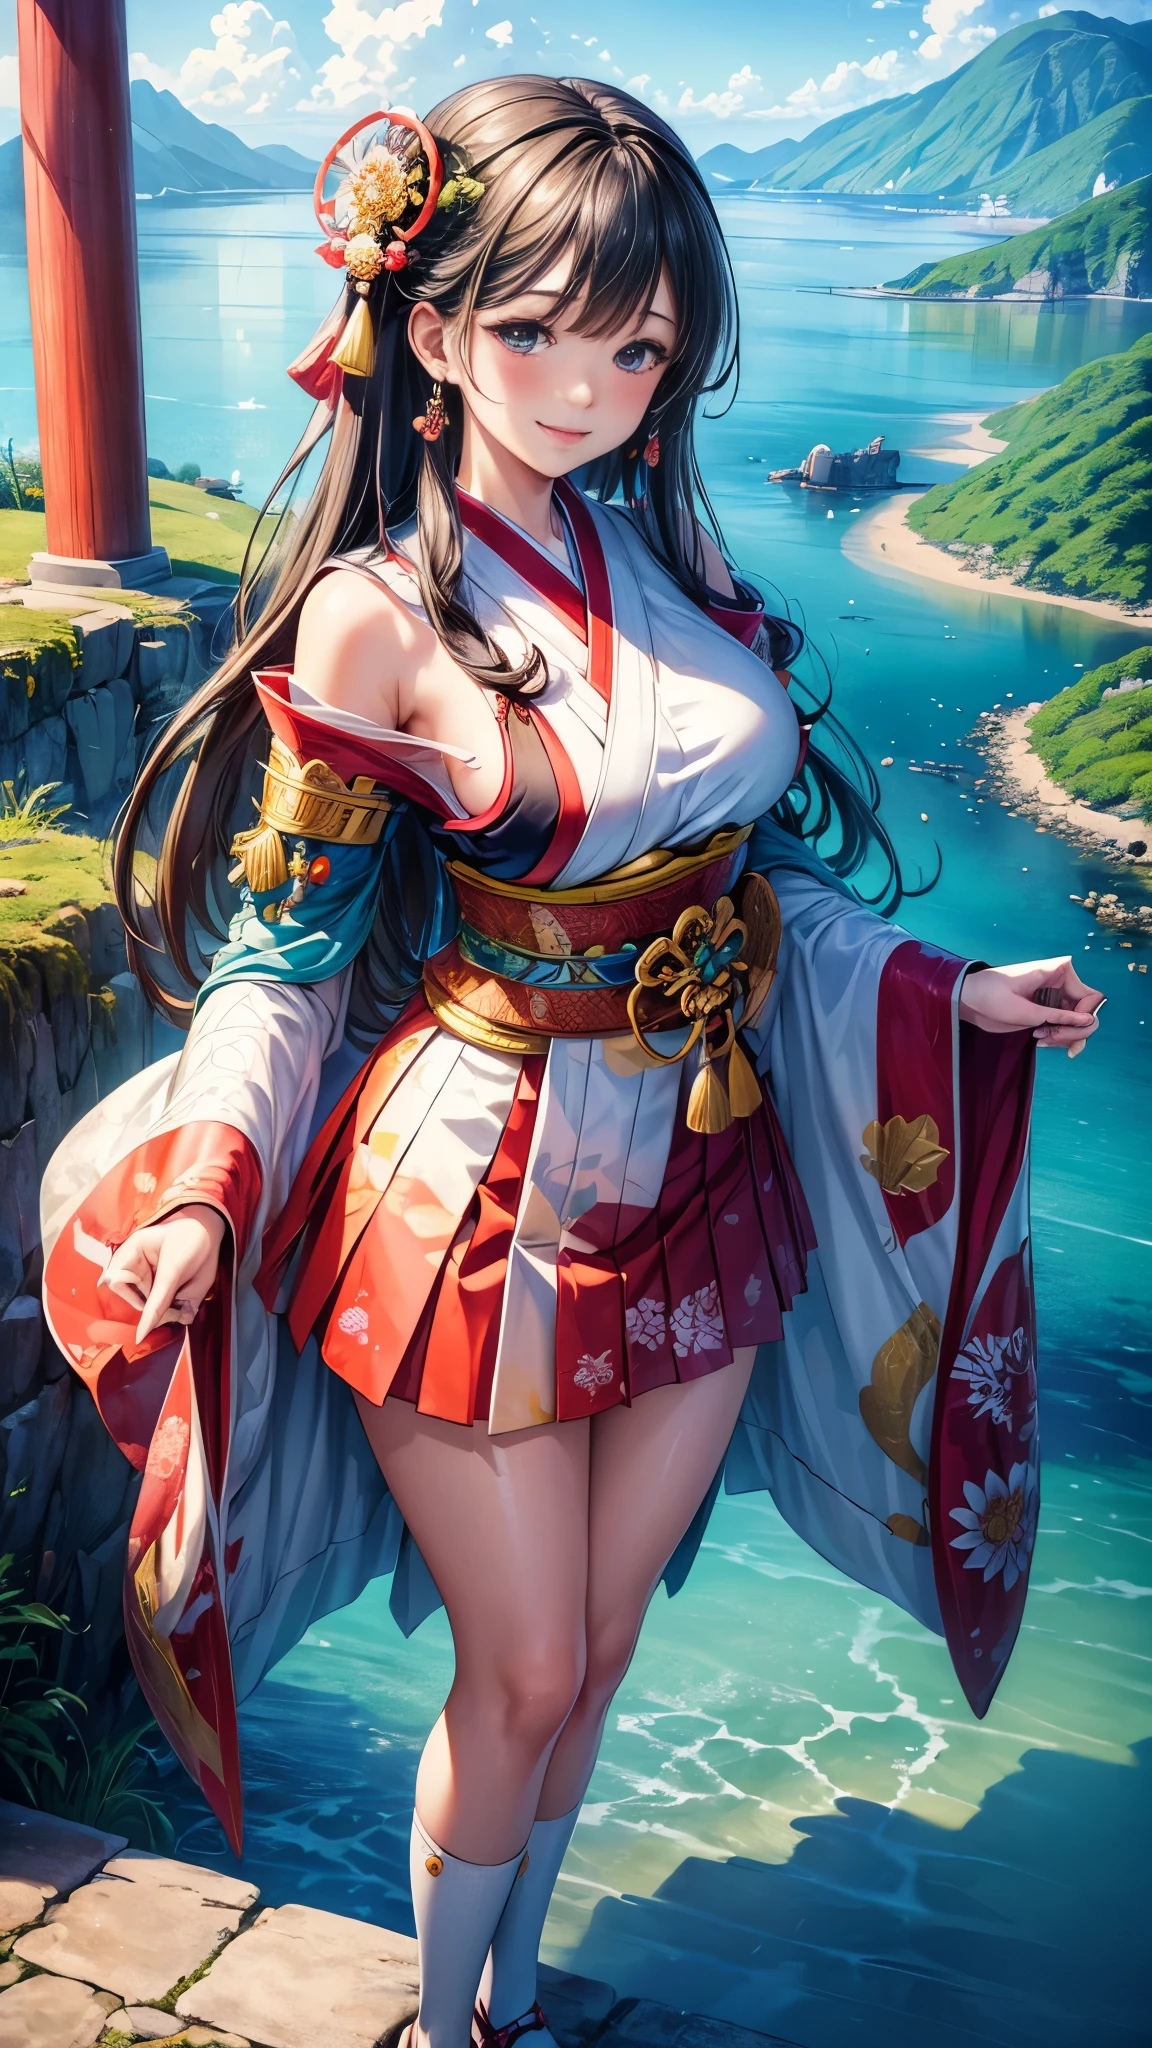 (Masterpiece: 1.5)
A captivating illustration of a girl, adorned in traditional Japanese attire, standing on the sacred island of Okinoshima. (Best Quality: 1.5)
With ultra-detailed precision, the artwork showcases the intricate patterns of her blouse and layered skirt, expertly rendered with crosshatching. (Ultra-Detailed: 1.3)
The illustration, reminiscent of a photorealistic painting, captures every nuance in her expression, her smile illuminating the serene panorama of the island. (Illustration: 1.2)
The 